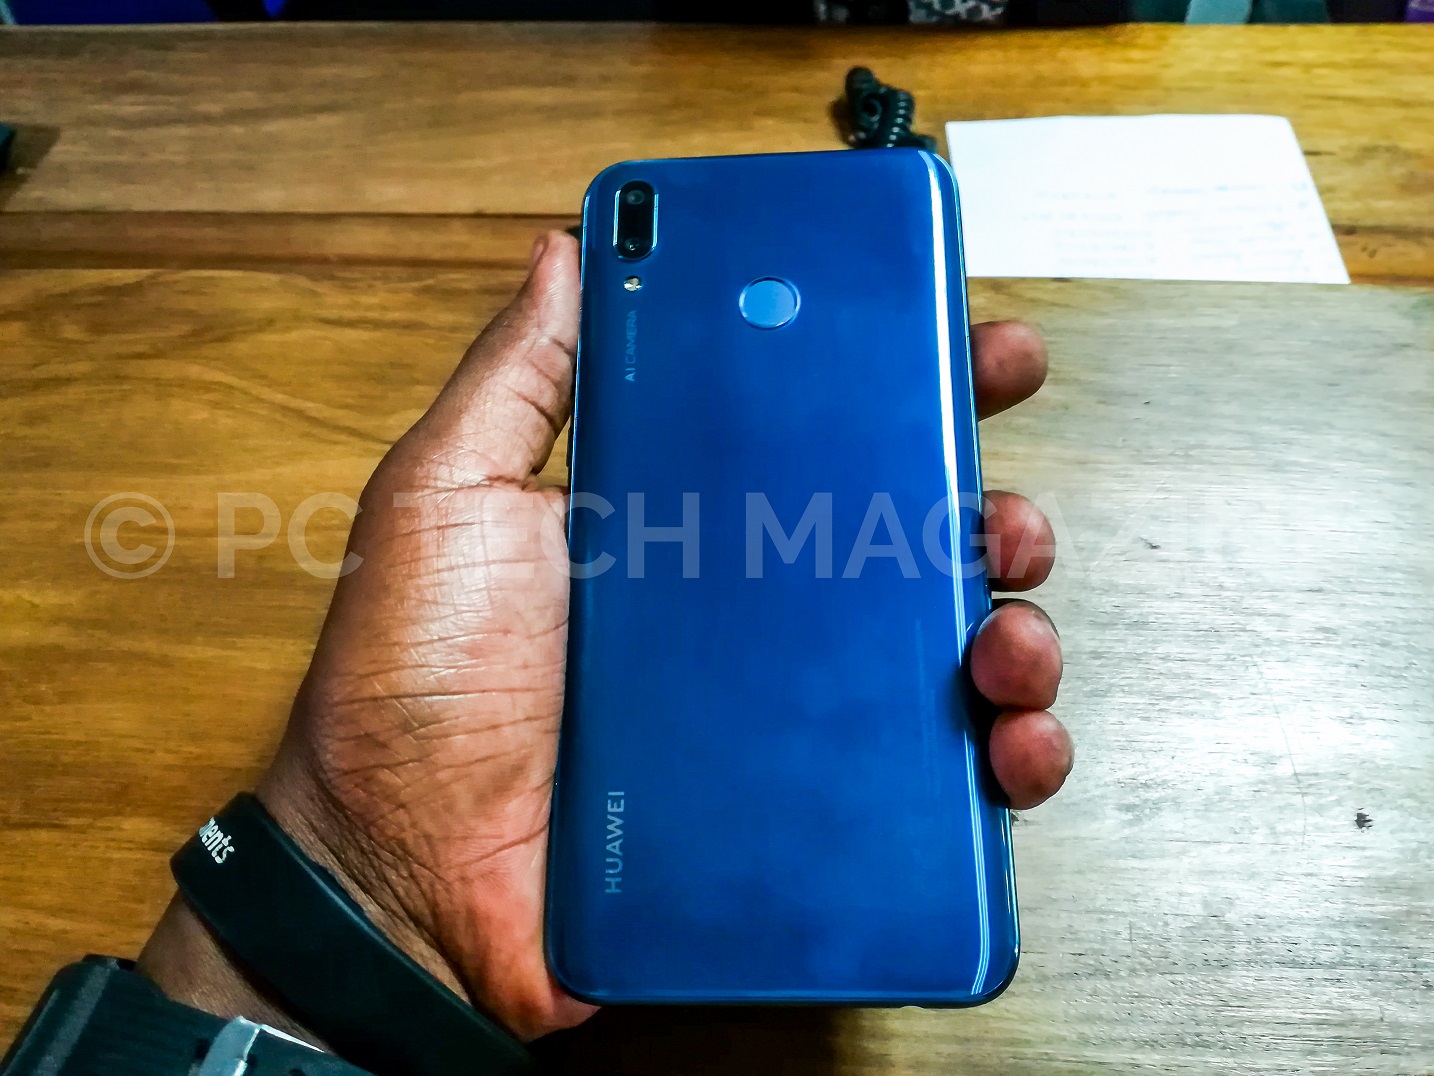 Photo of Huawei Y9 Full Review: A Potential Mid-Range Handset